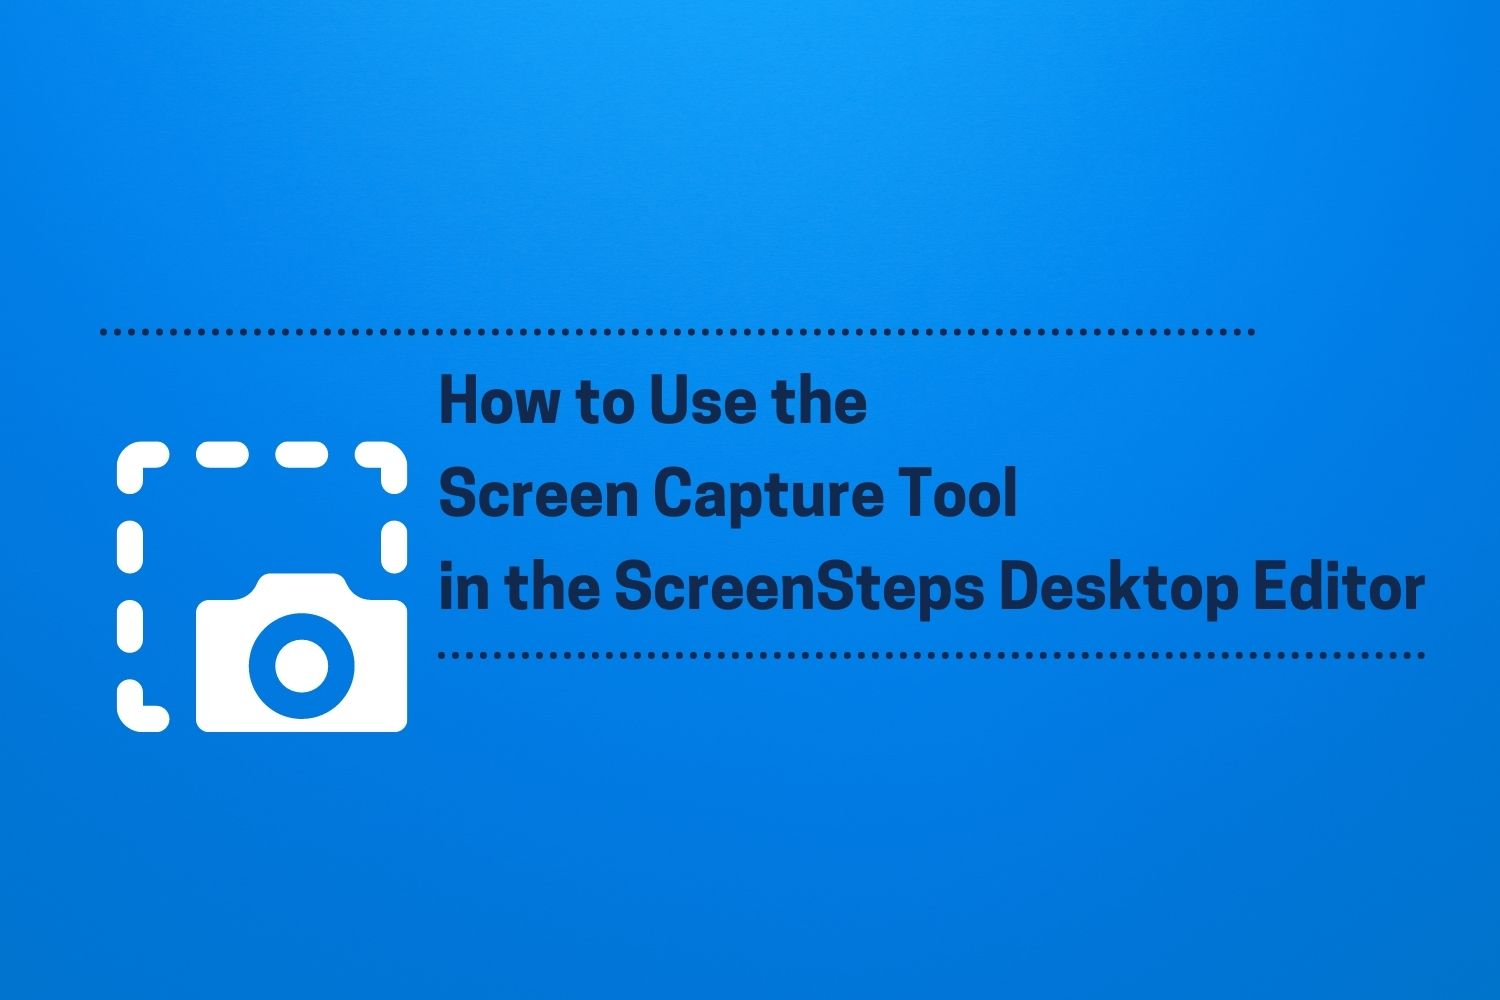 How to Use the Screen Capture Tool in the ScreenSteps Desktop Editor [VIDEO]